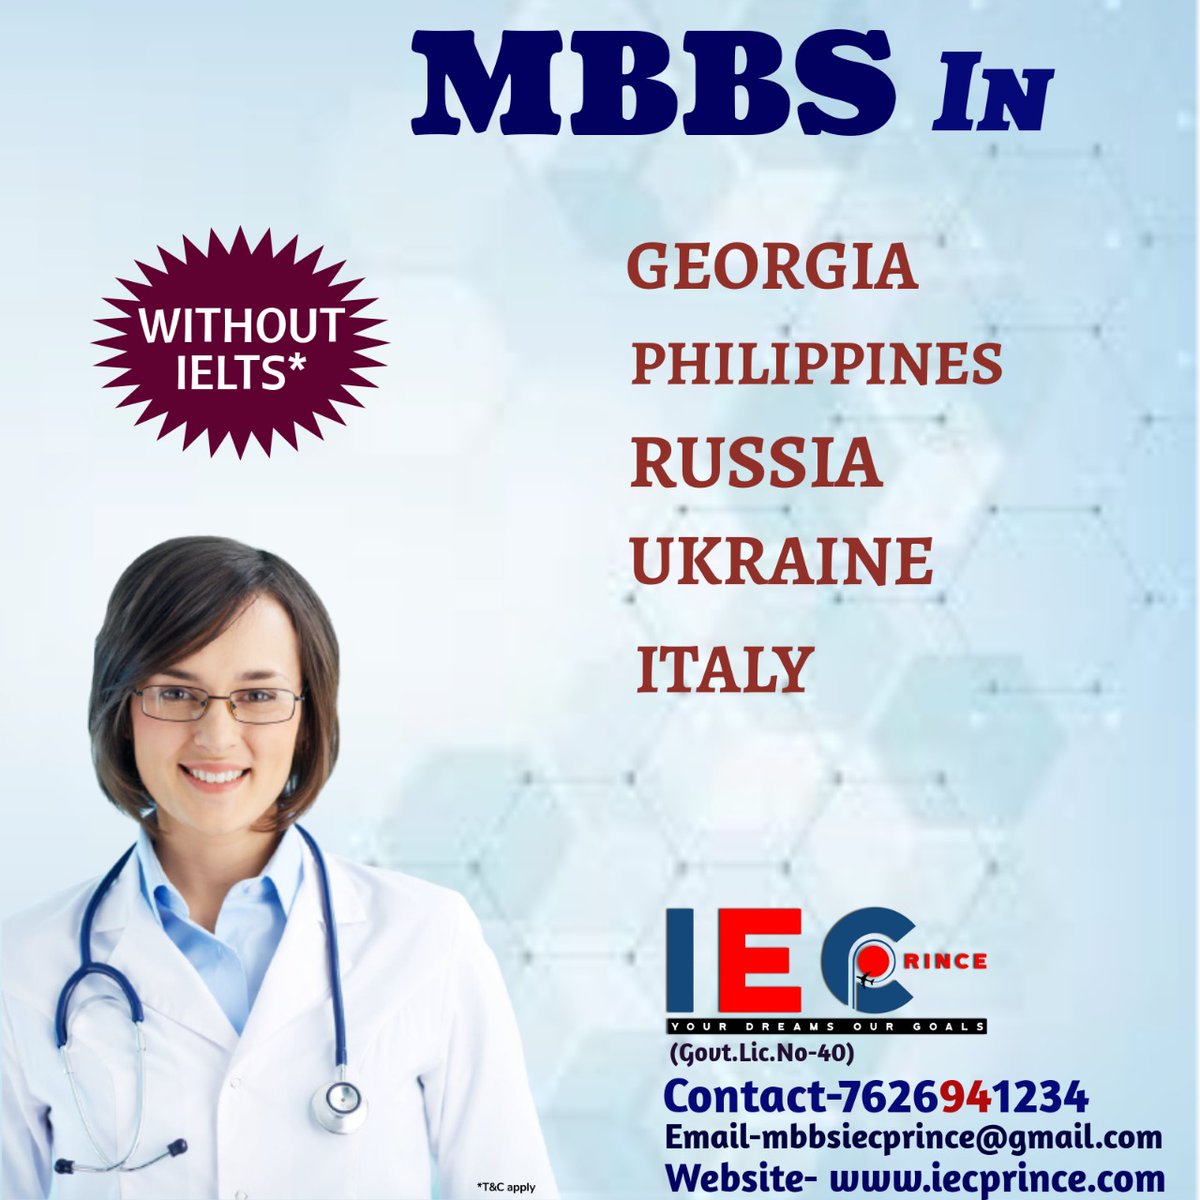 Apply for MBBS Programs 
Contact 7626941234 

#MBBS #iecprince #georgia #Philippines #russia #ukraine #mbbswithoutielts #consultantinmohali